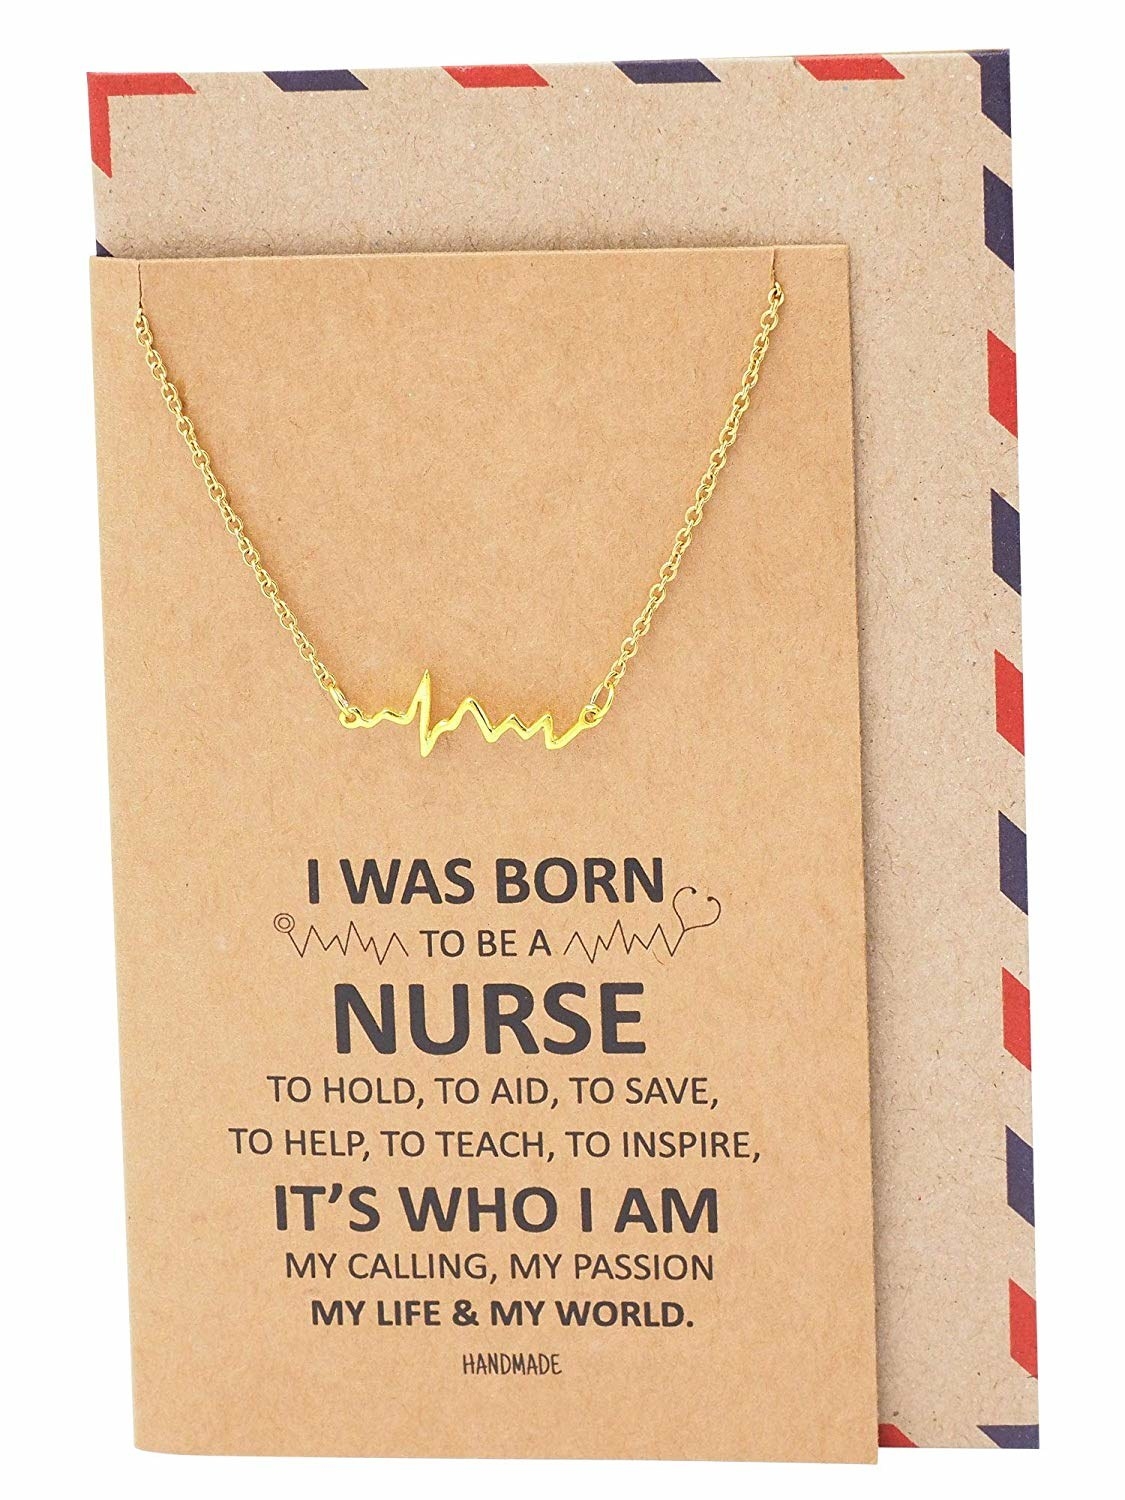 the heartbeat necklace on a card that says &quot;I was born to be a nurse&quot;